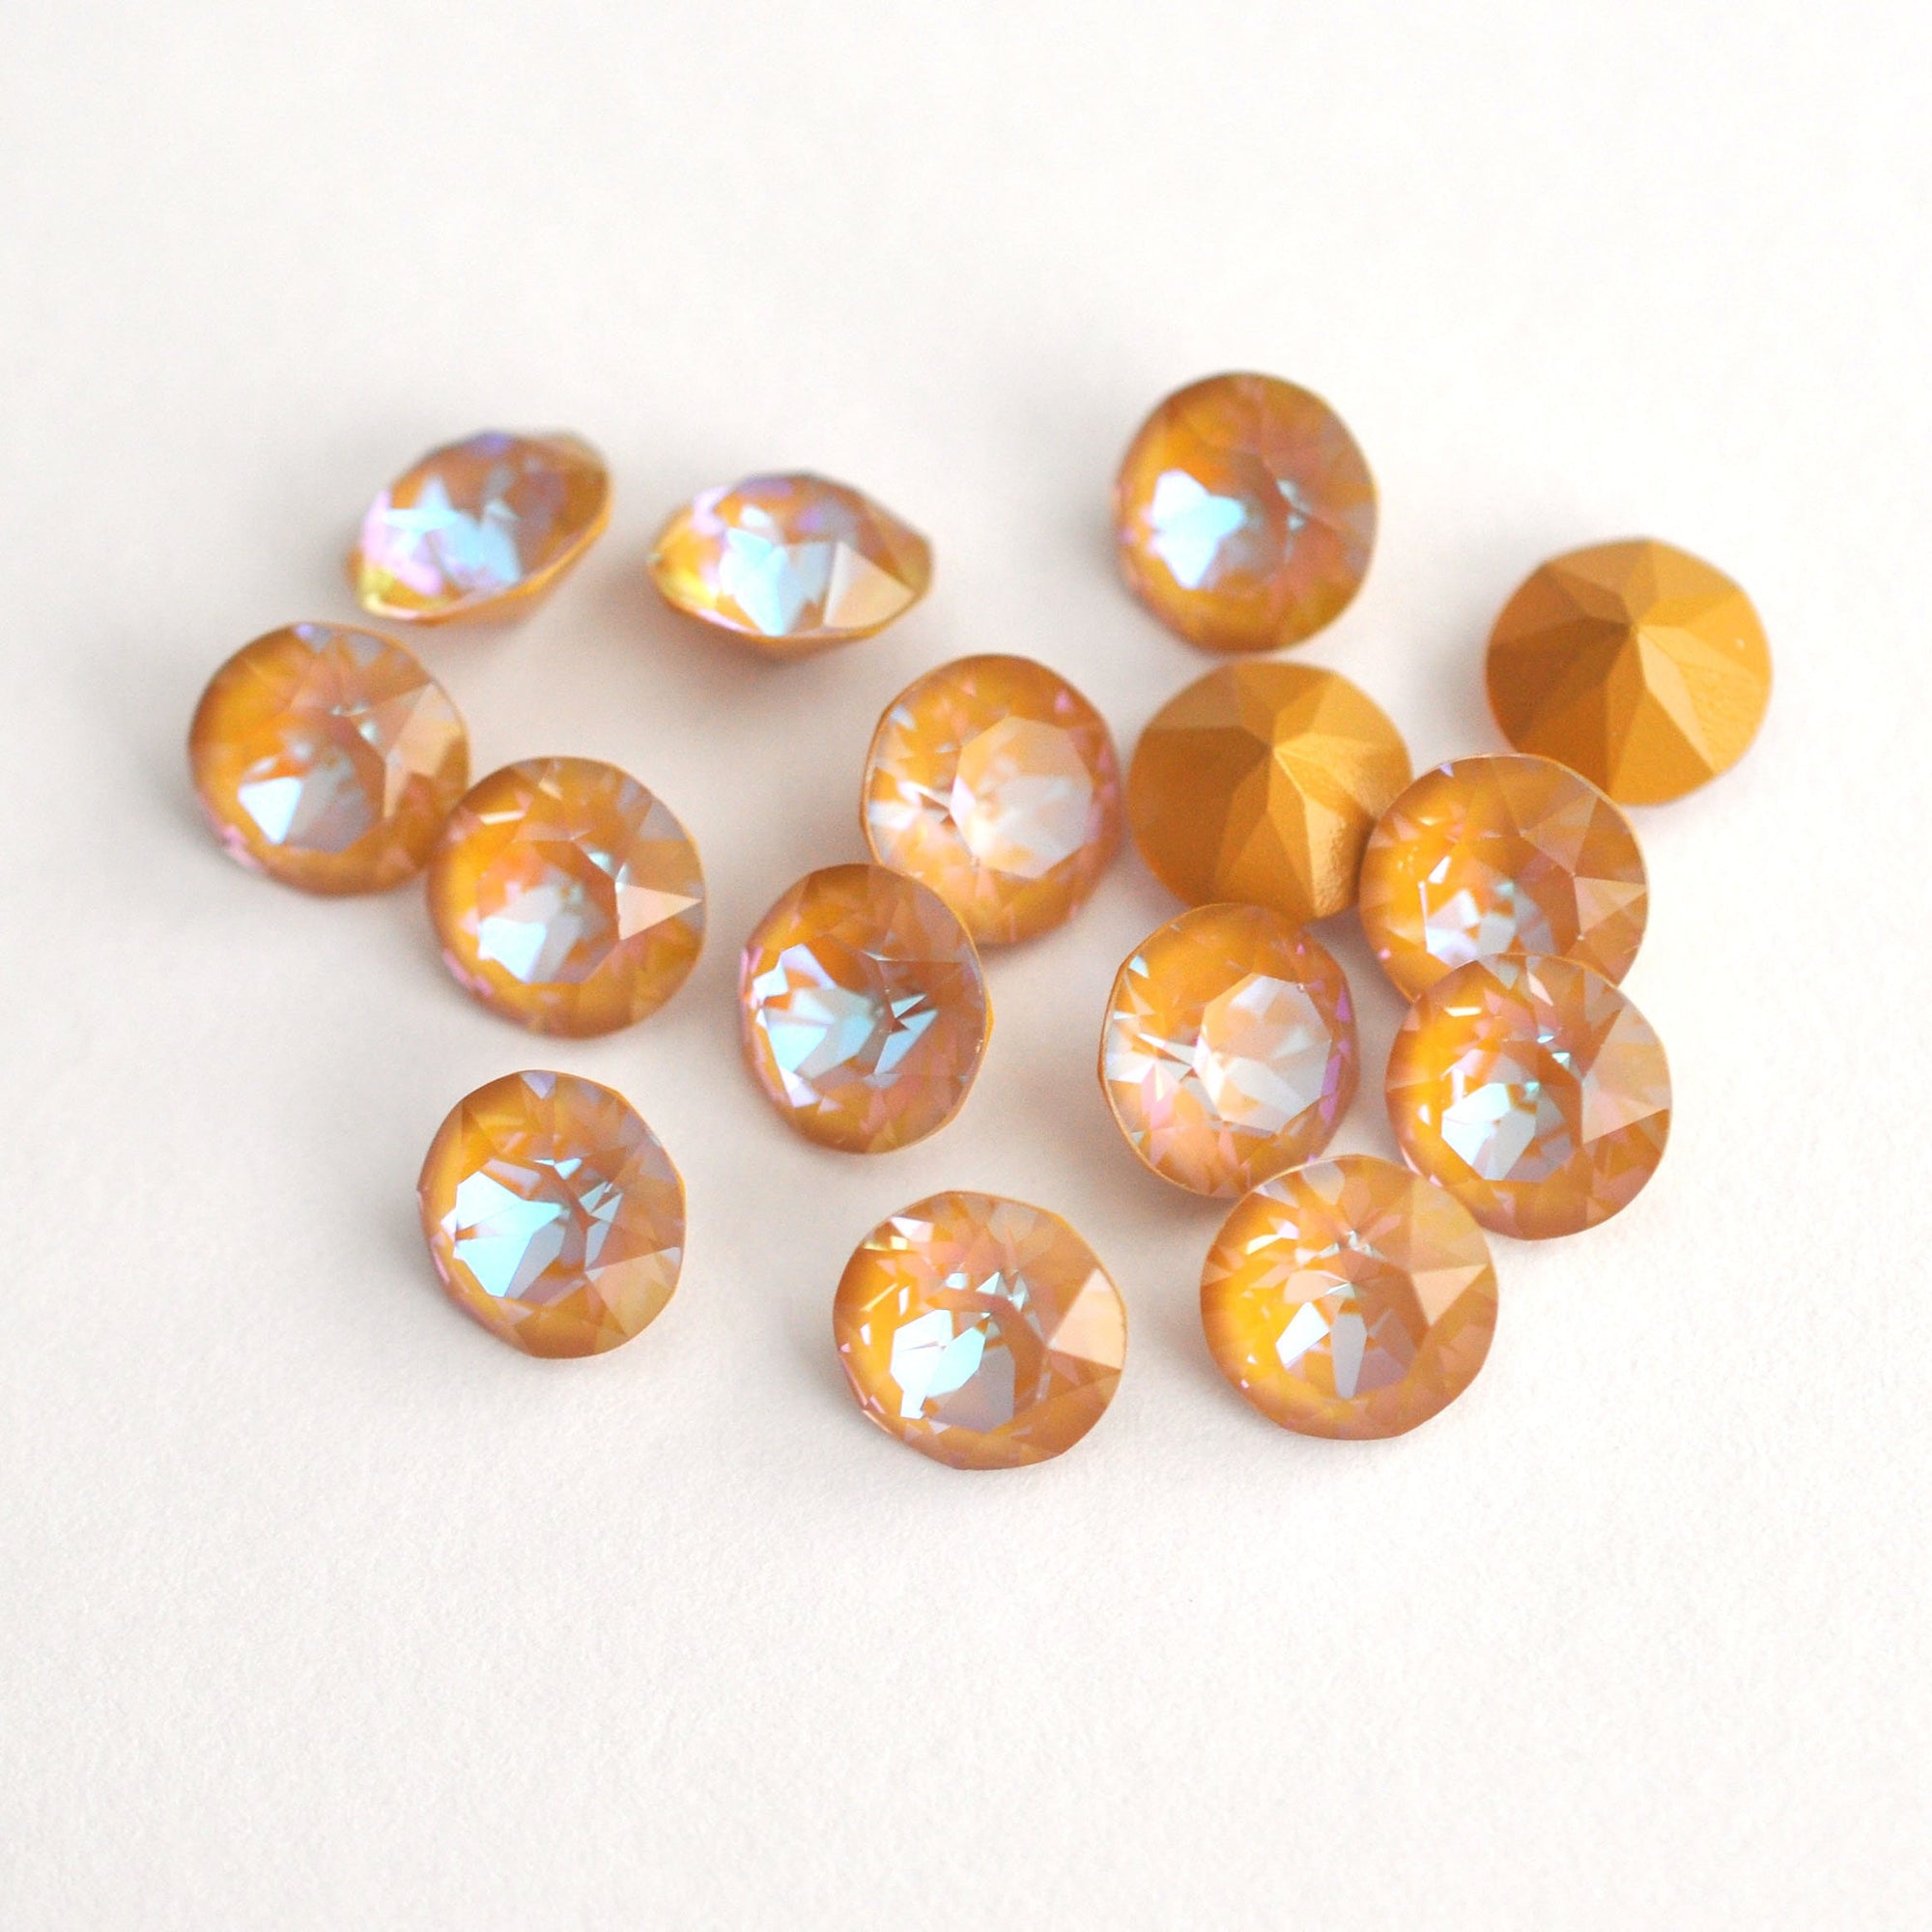 Ochre Delite 1088 Pointed Back Chaton Barton Crystal 39ss, 8mm